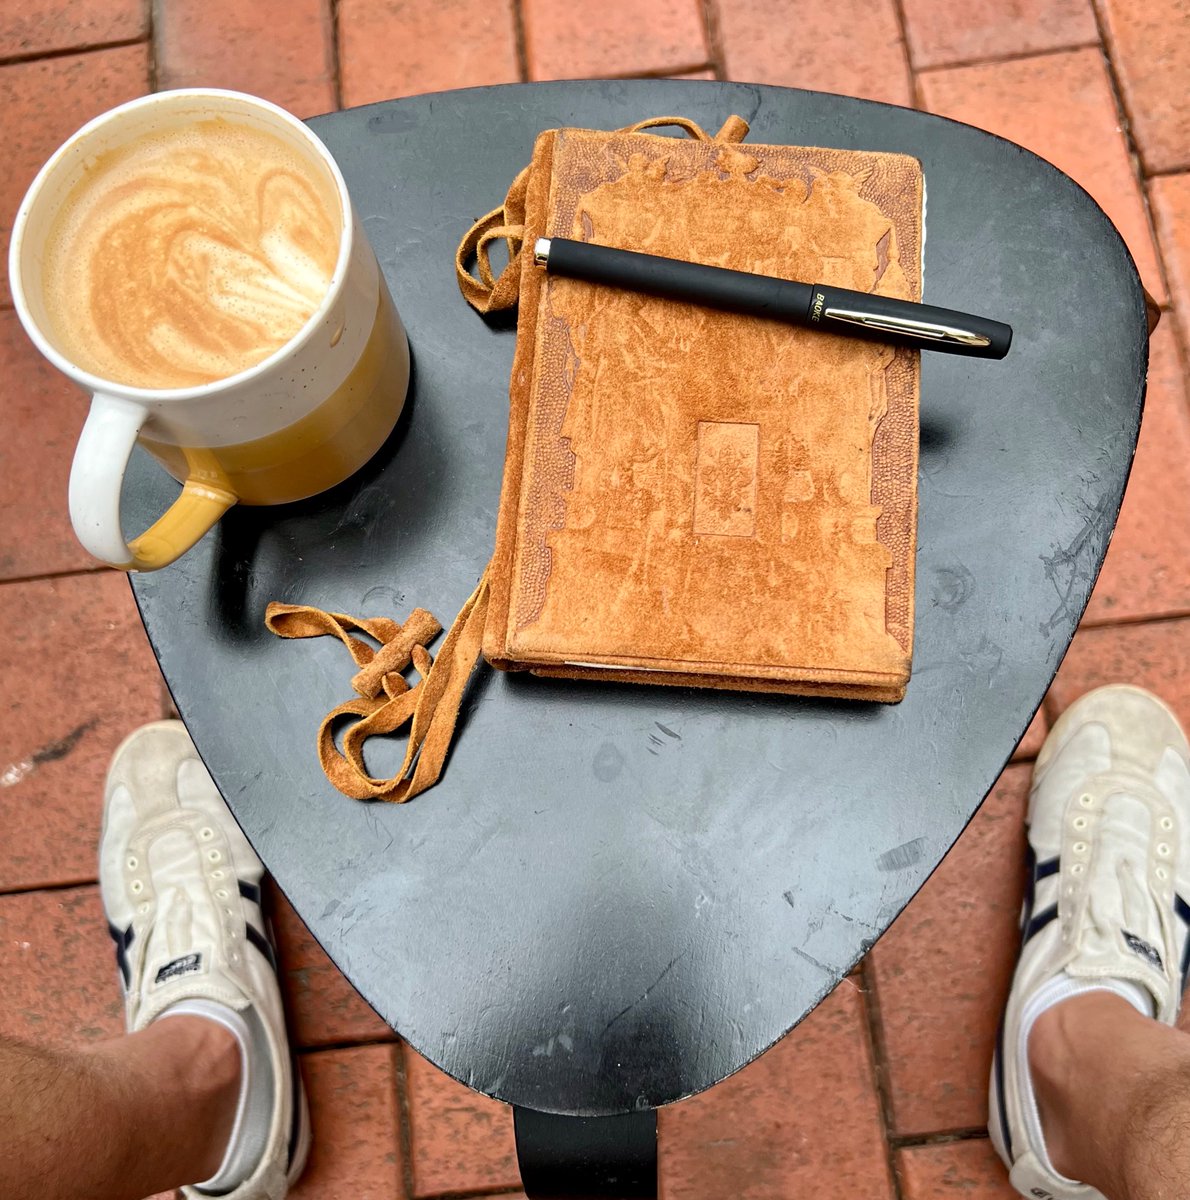 Kicking off the writing day with three handwritten pages, like most days for twenty-five years. Hope you’re feeling the flow where you are. 😊✌️

#morningpages #notebook #amwriting #coffeetime #loveozmg